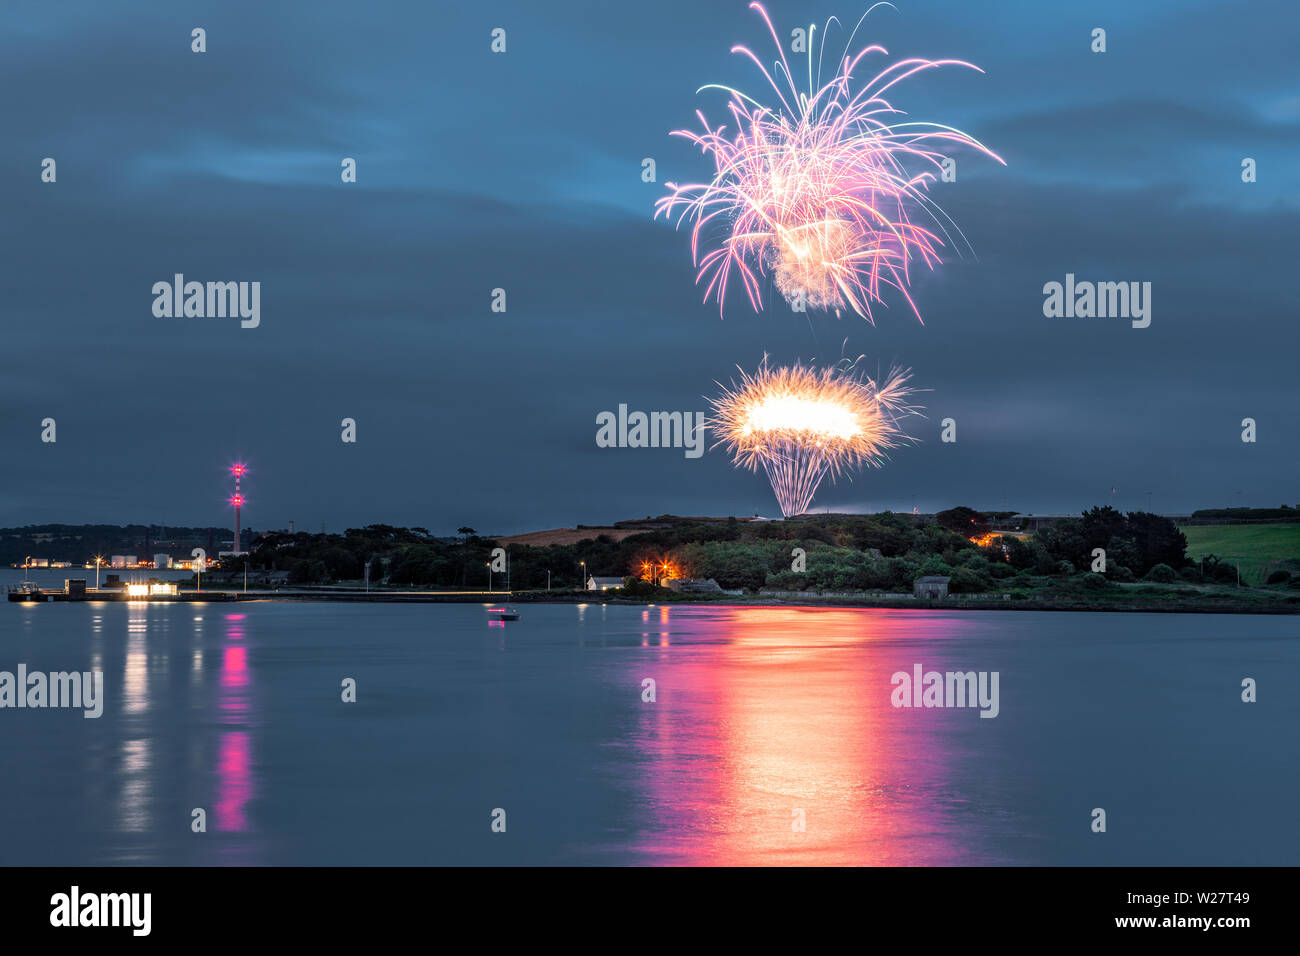 Spike Island, Cork, Ireland. 06th July, 2019. A spectacular Fireworks display lights the night sky over Spike Island, Cork, Ireland where the lives of the prisoners who died on the Island was marked. The display is part of a celebration to mark the 81st anniversary of the handover of the island from Britain to Ireland in 1938 and comes as management say they are on track to host over 70,000 visitors this year due to new exhibitions and the delivery of a 126 seater ferry. Credit: David Creedon/Alamy Live News Stock Photo